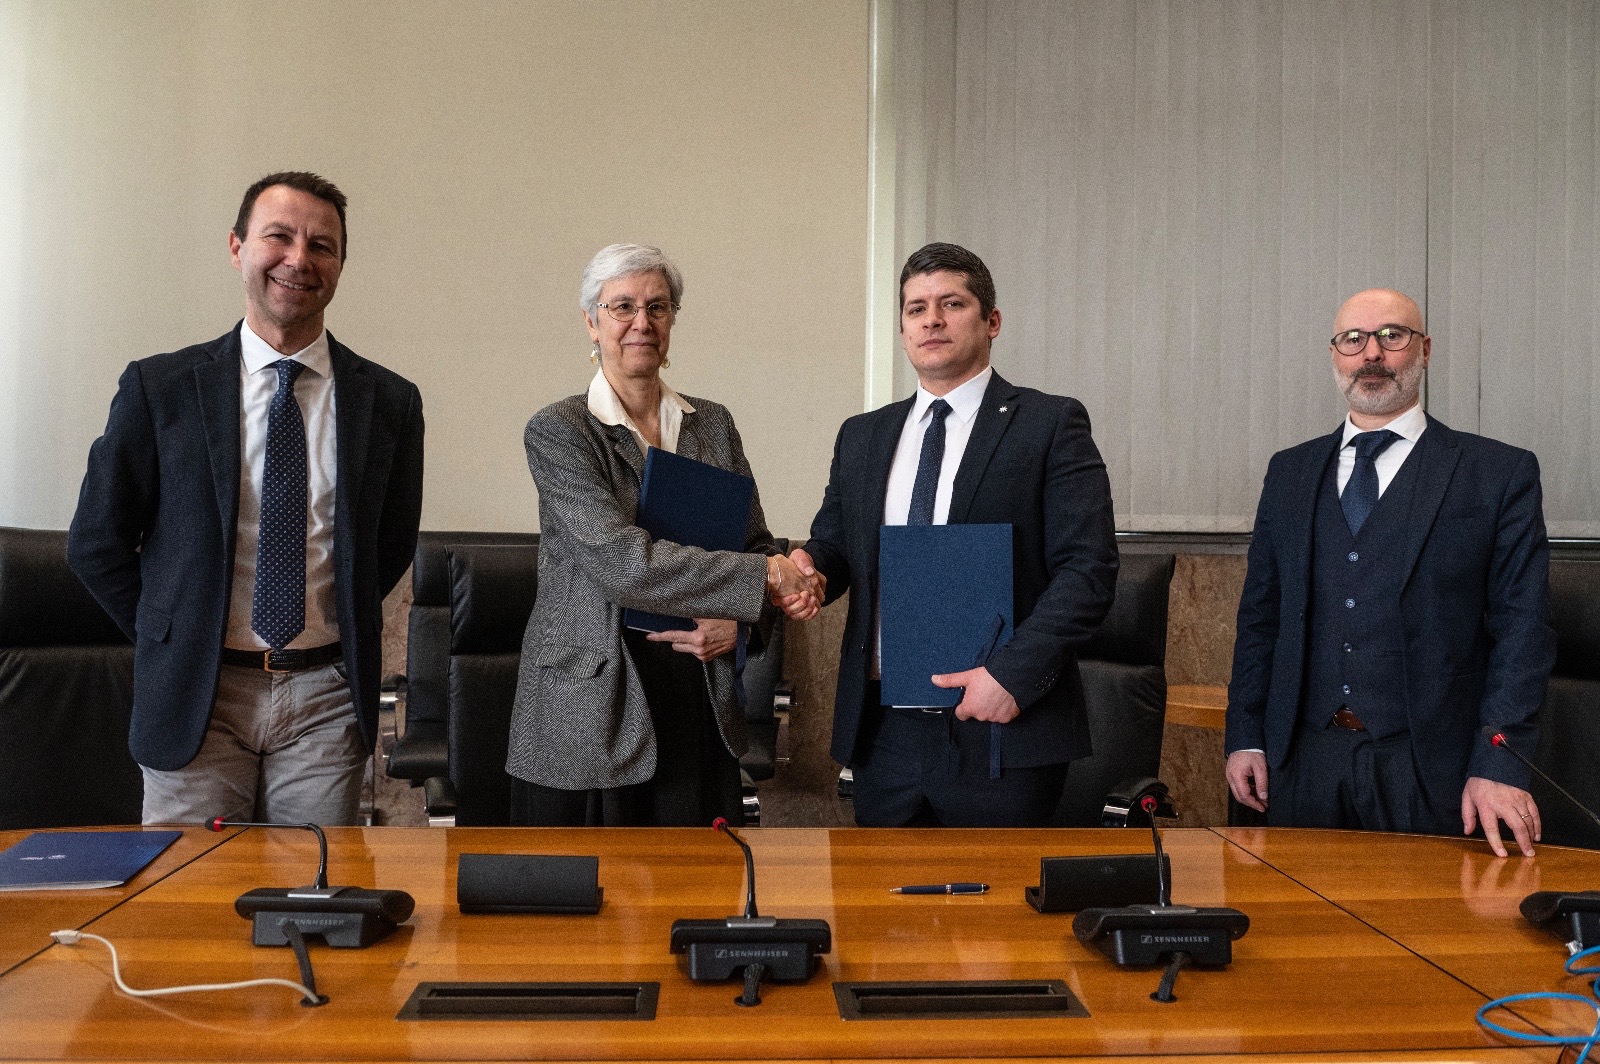 Seingim and Politecnico of Torino together to develop innovative engineering solutions